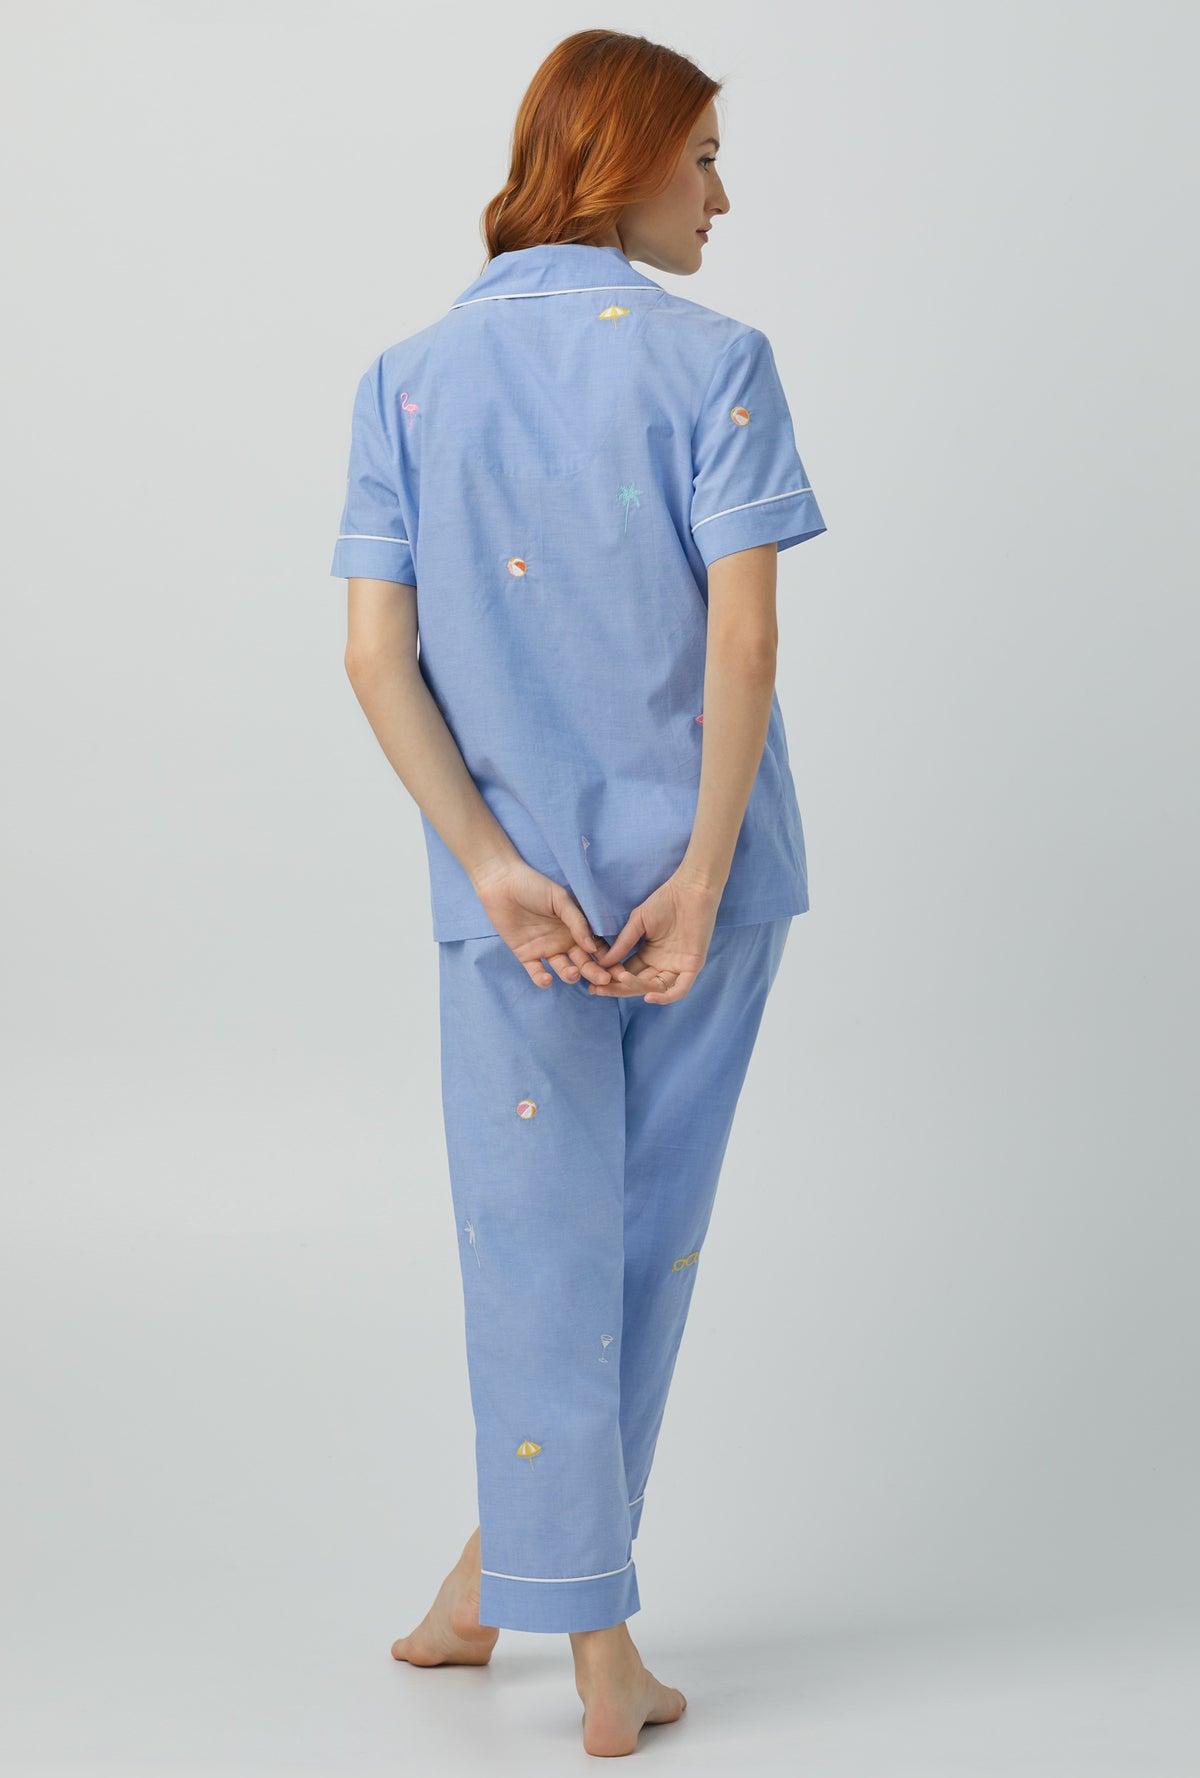 A lady wearing blue Short Sleeve Classic Woven Cotton Poplin Cropped PJ Set with Chambray print